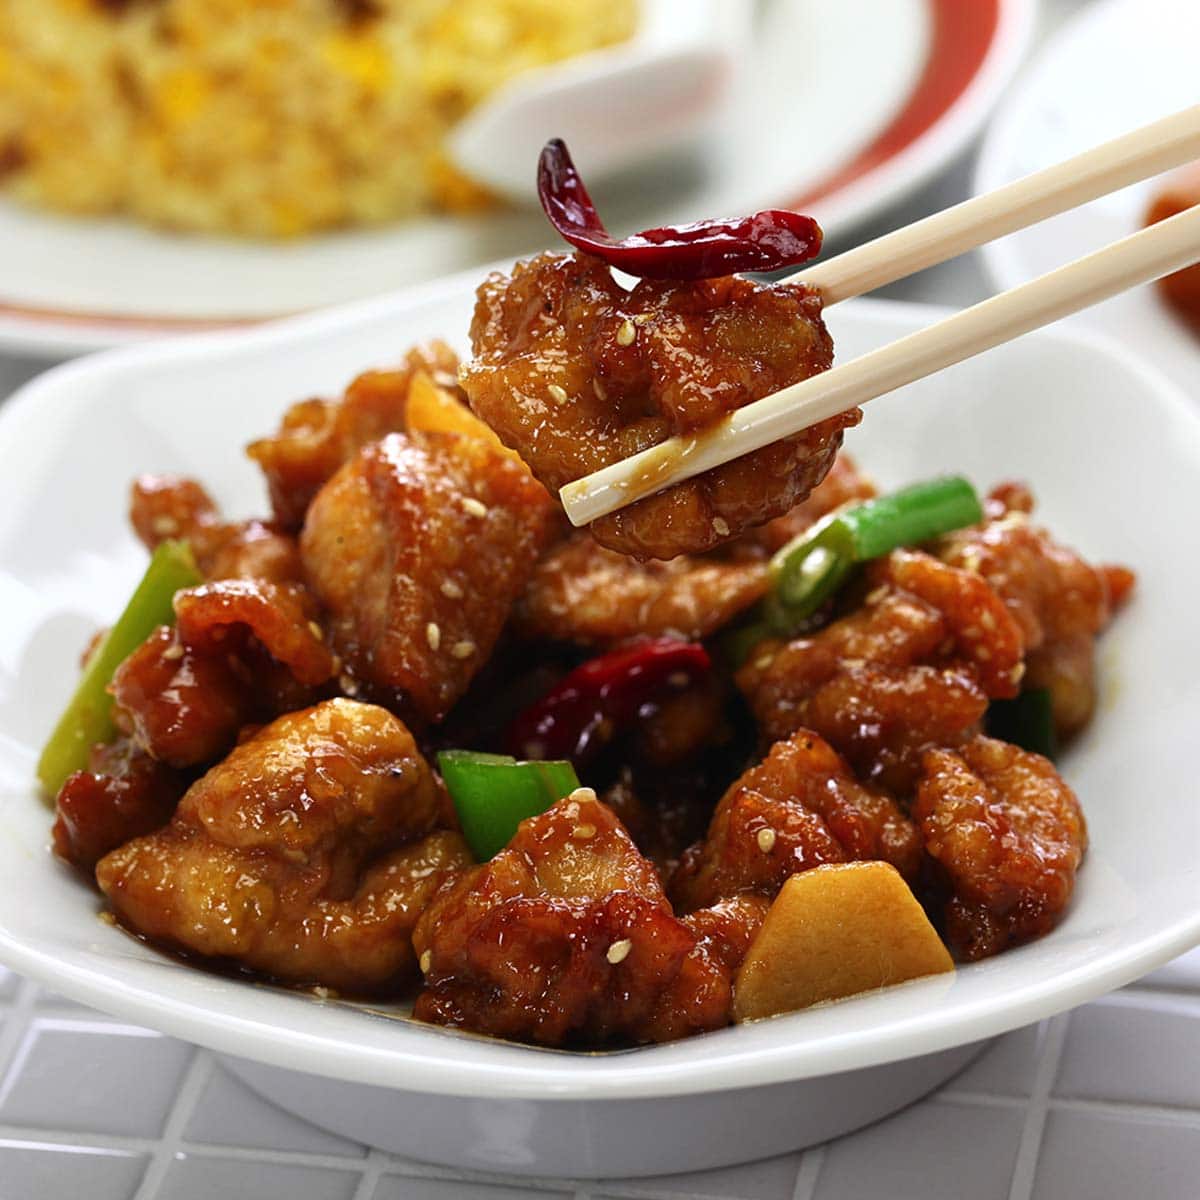 If you store and handle your leftover Chinese takeout properly, it will be safe to eat, and it will keep longer while retaining its good quality.